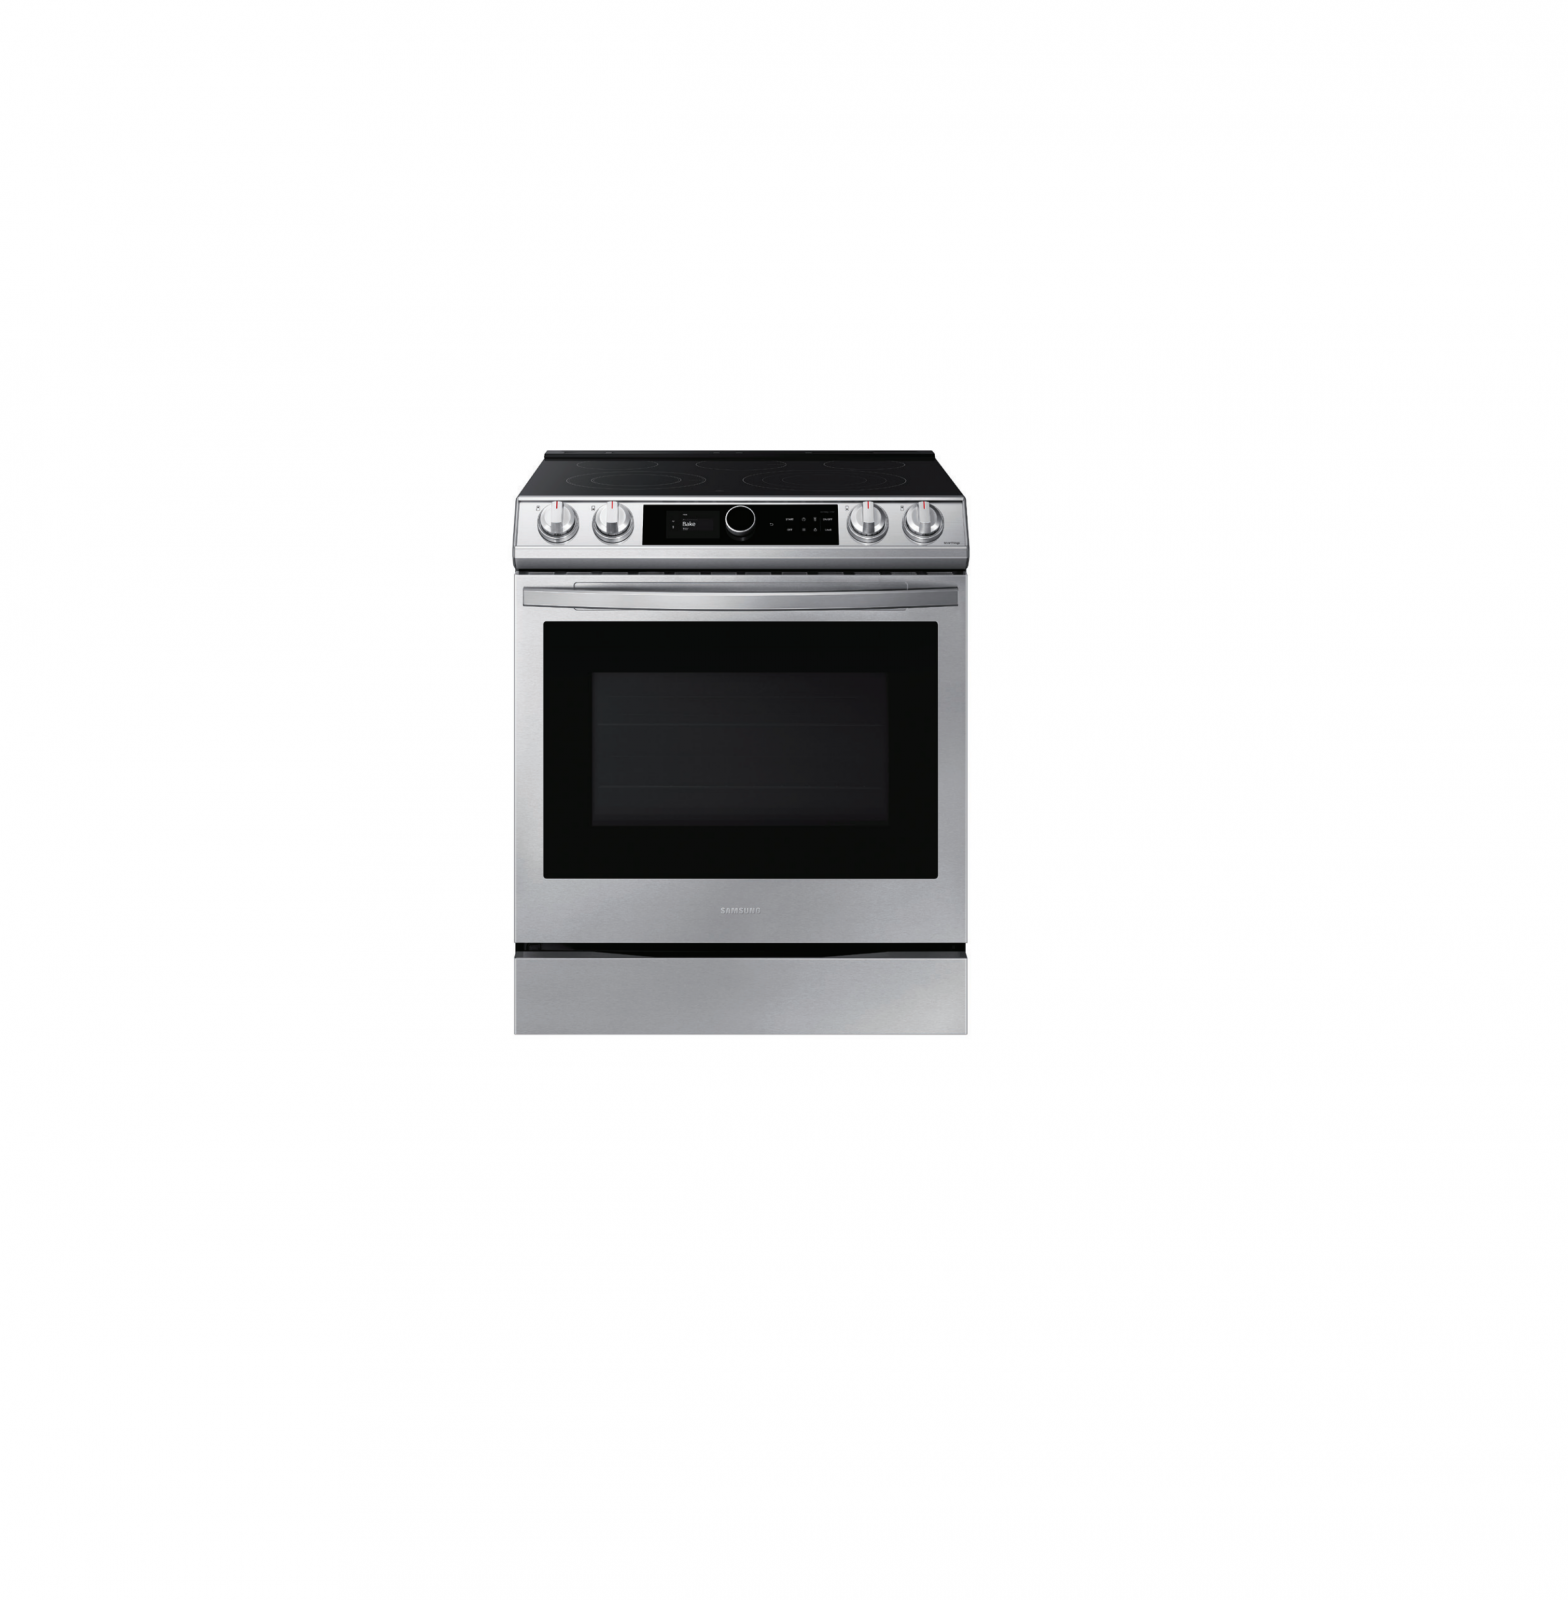 SAMSUNG Front Control Slide-in Electric Range Smart Dial Air Fry User Manual